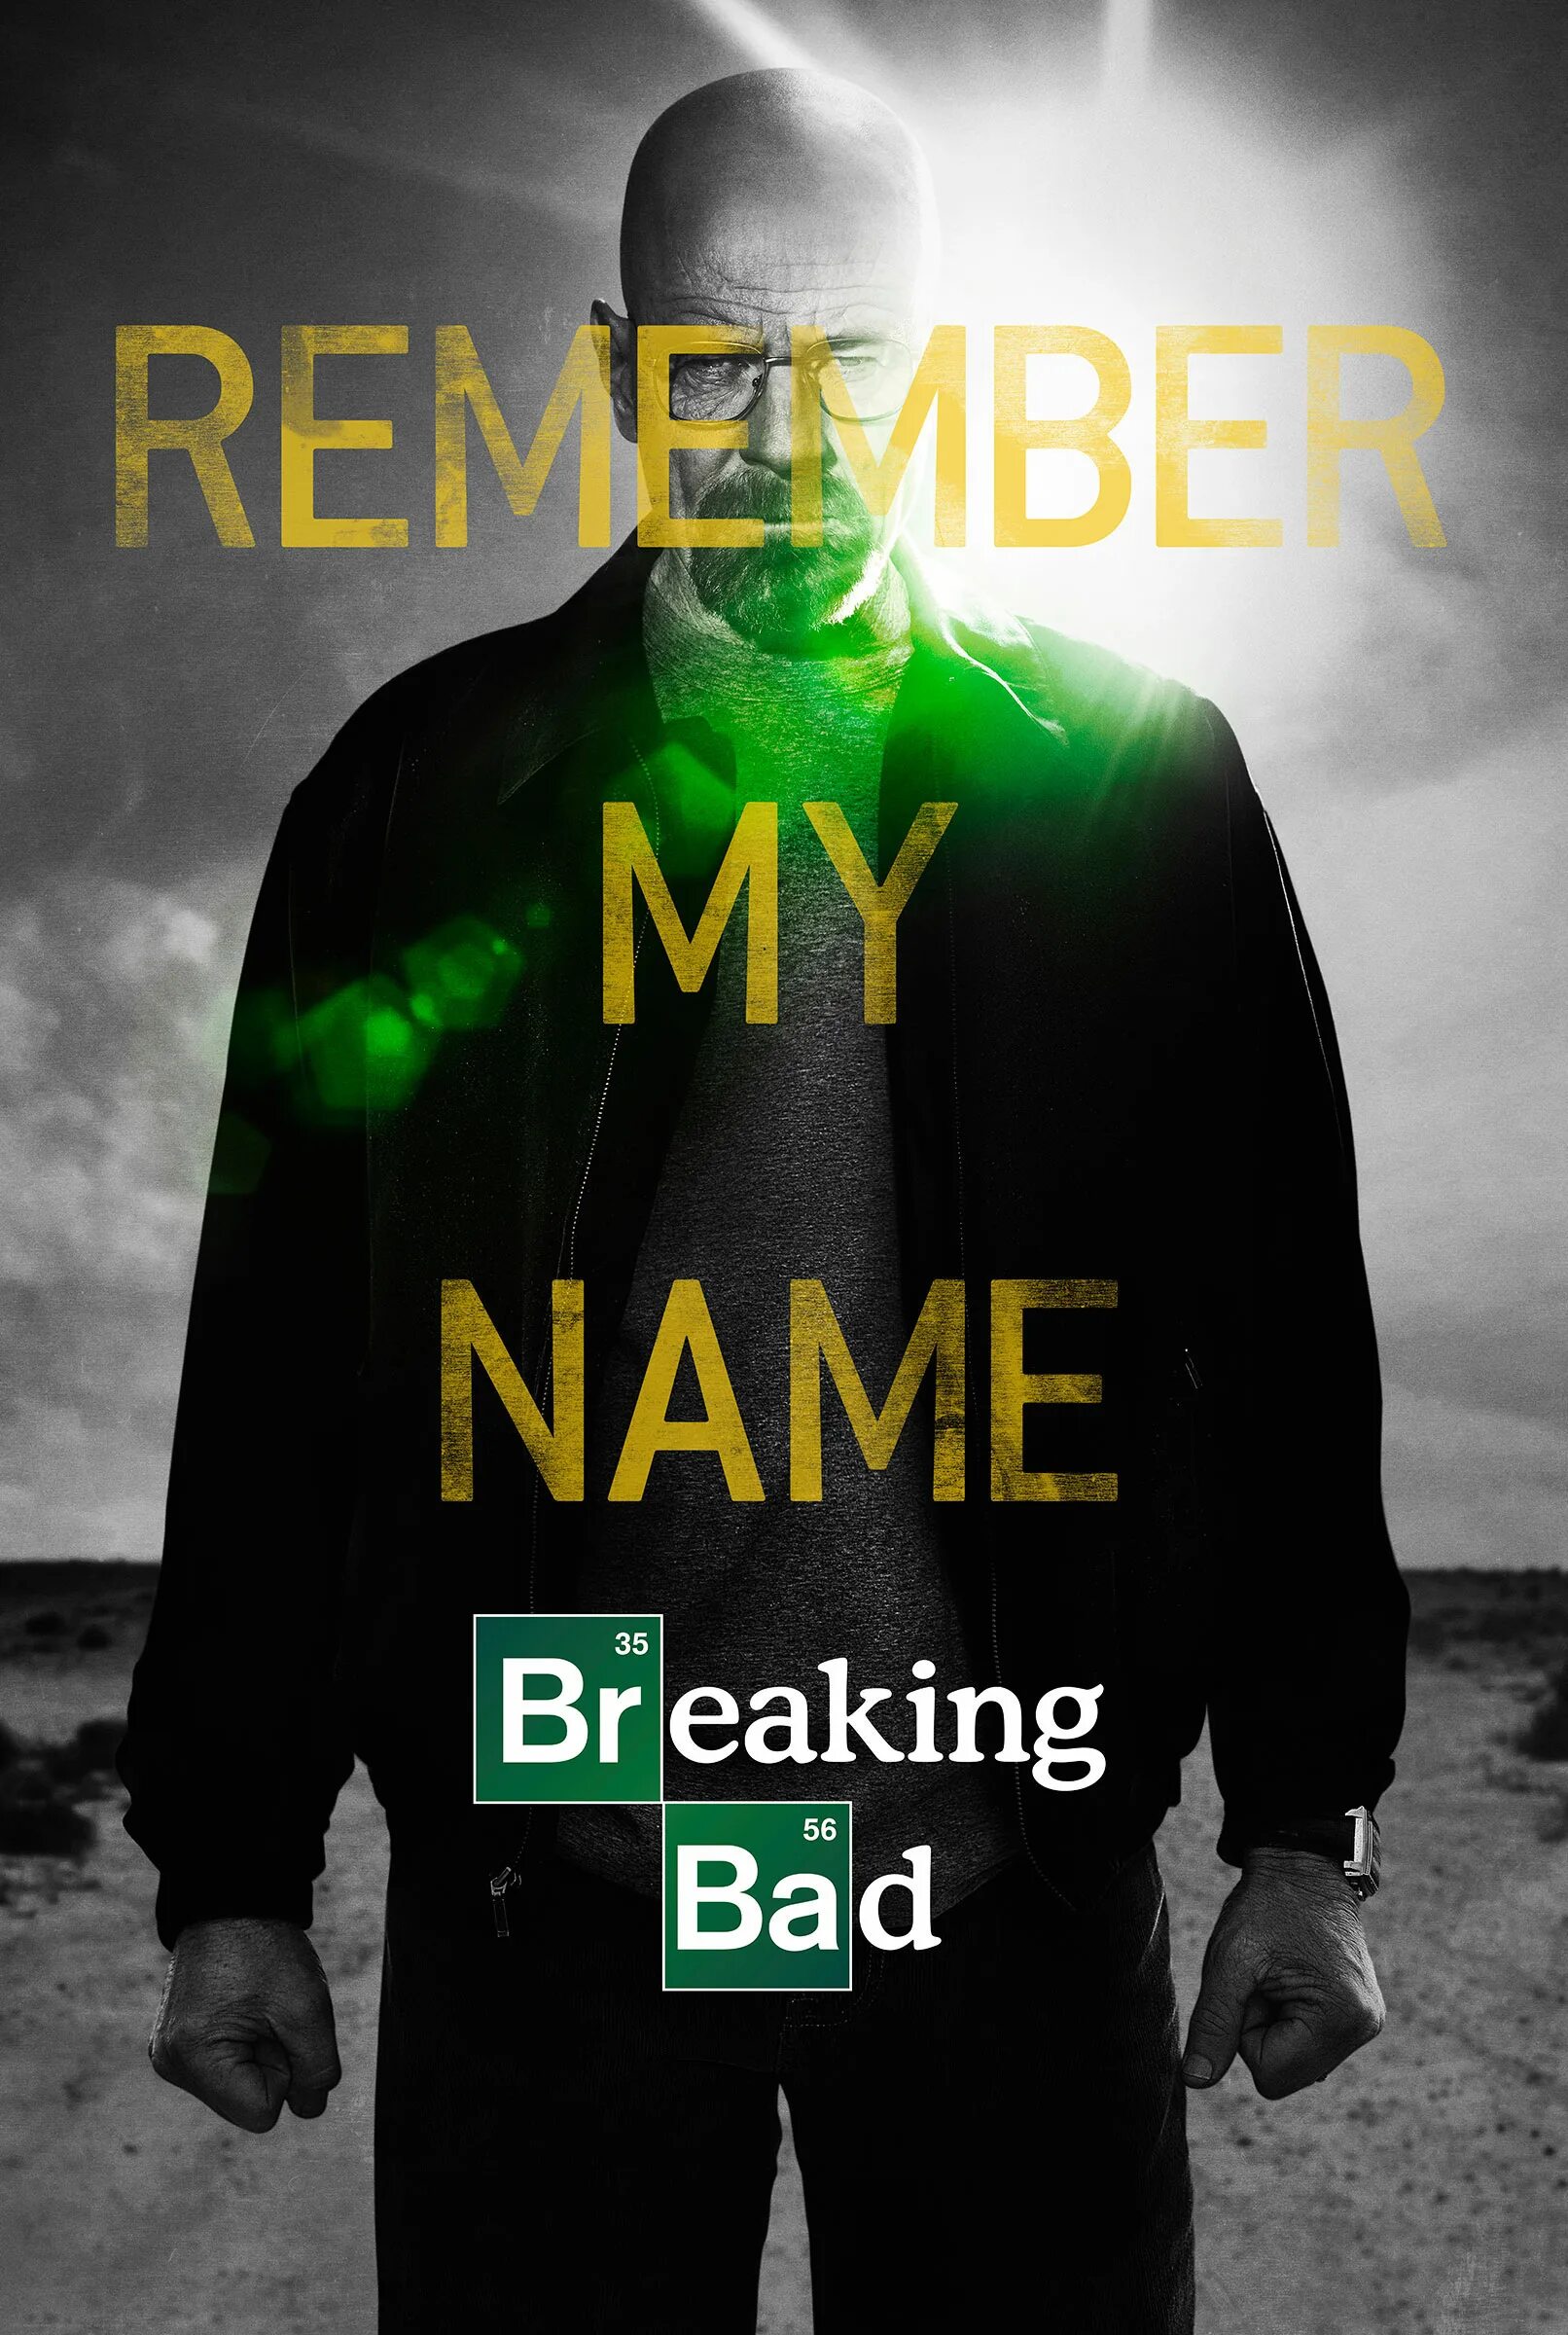 Bad final. Remember my name Breaking Bad. Во все тяжкие. Во все тяжкие remember my name. Постер Breaking Bad.